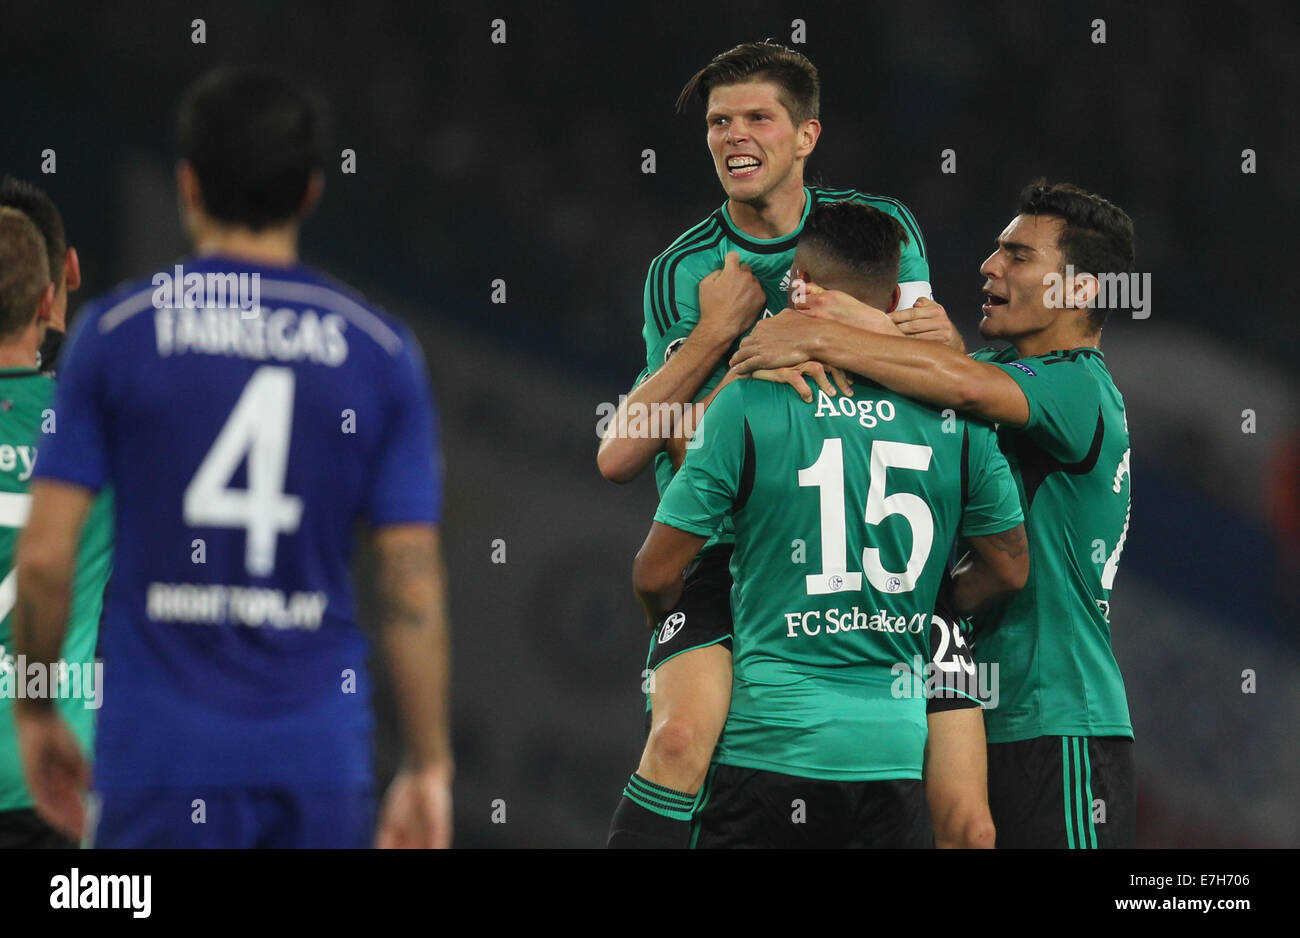 London, Britain. 17th Sep, 2014. Schalke's Klaas-Jan Huntelaar (l), Dennis Aogo and Kaan Ayhan (r) celebrate a goal against Chelsea during the UEFA Champions League Group G soccer match between Chelsea FC and FC Schalke 04 at Stamford Bridge stadium in London, Britain, 17 September 2014. Photo: Ina Fassbender/dpa/Alamy Live News Stock Photo